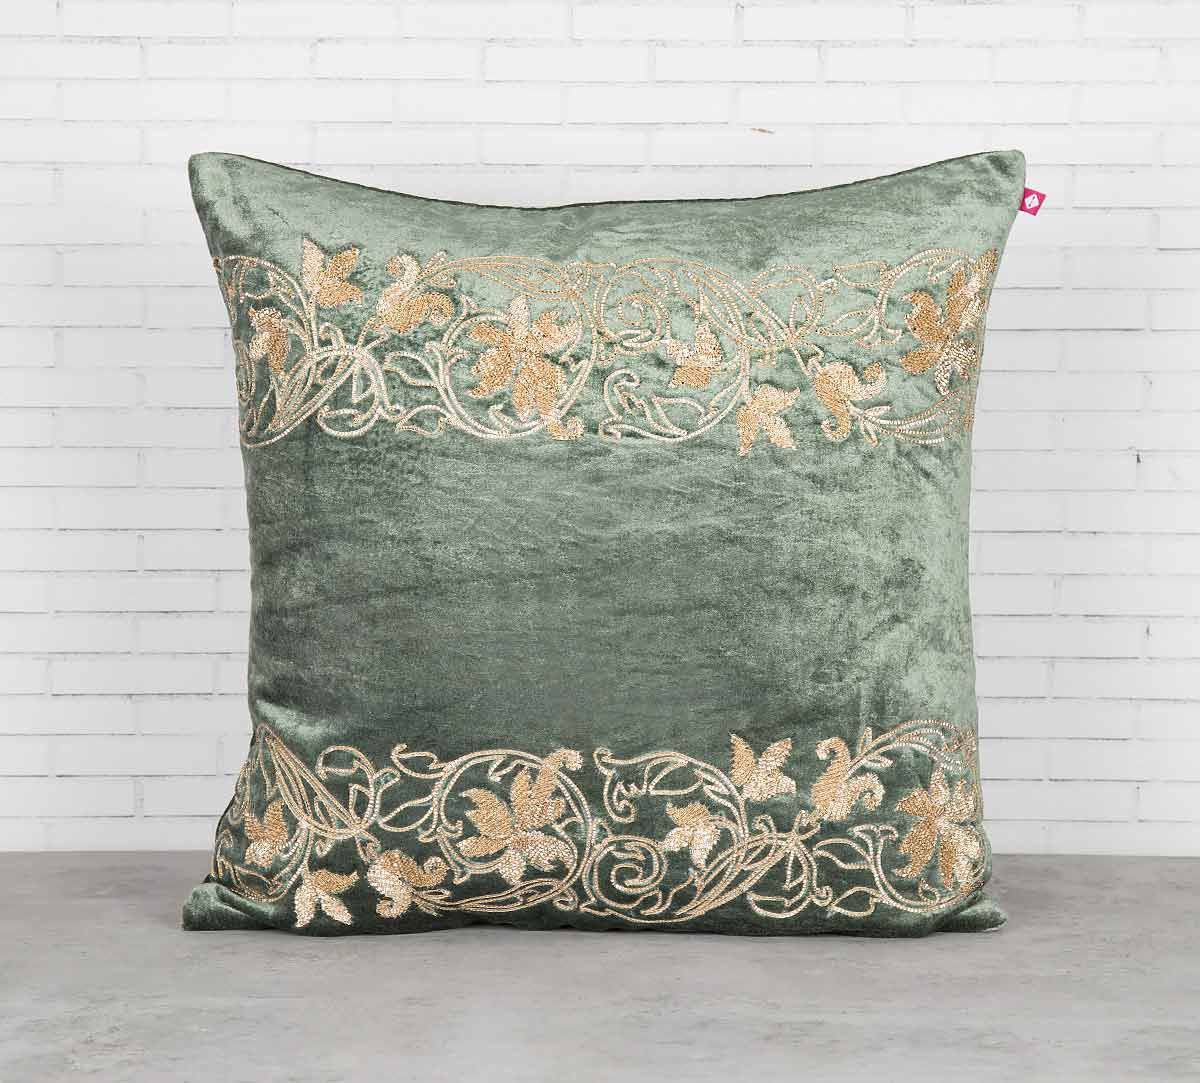 India Circus Floral Bandage Siege Green Embroidered Velvet Cushion Cover